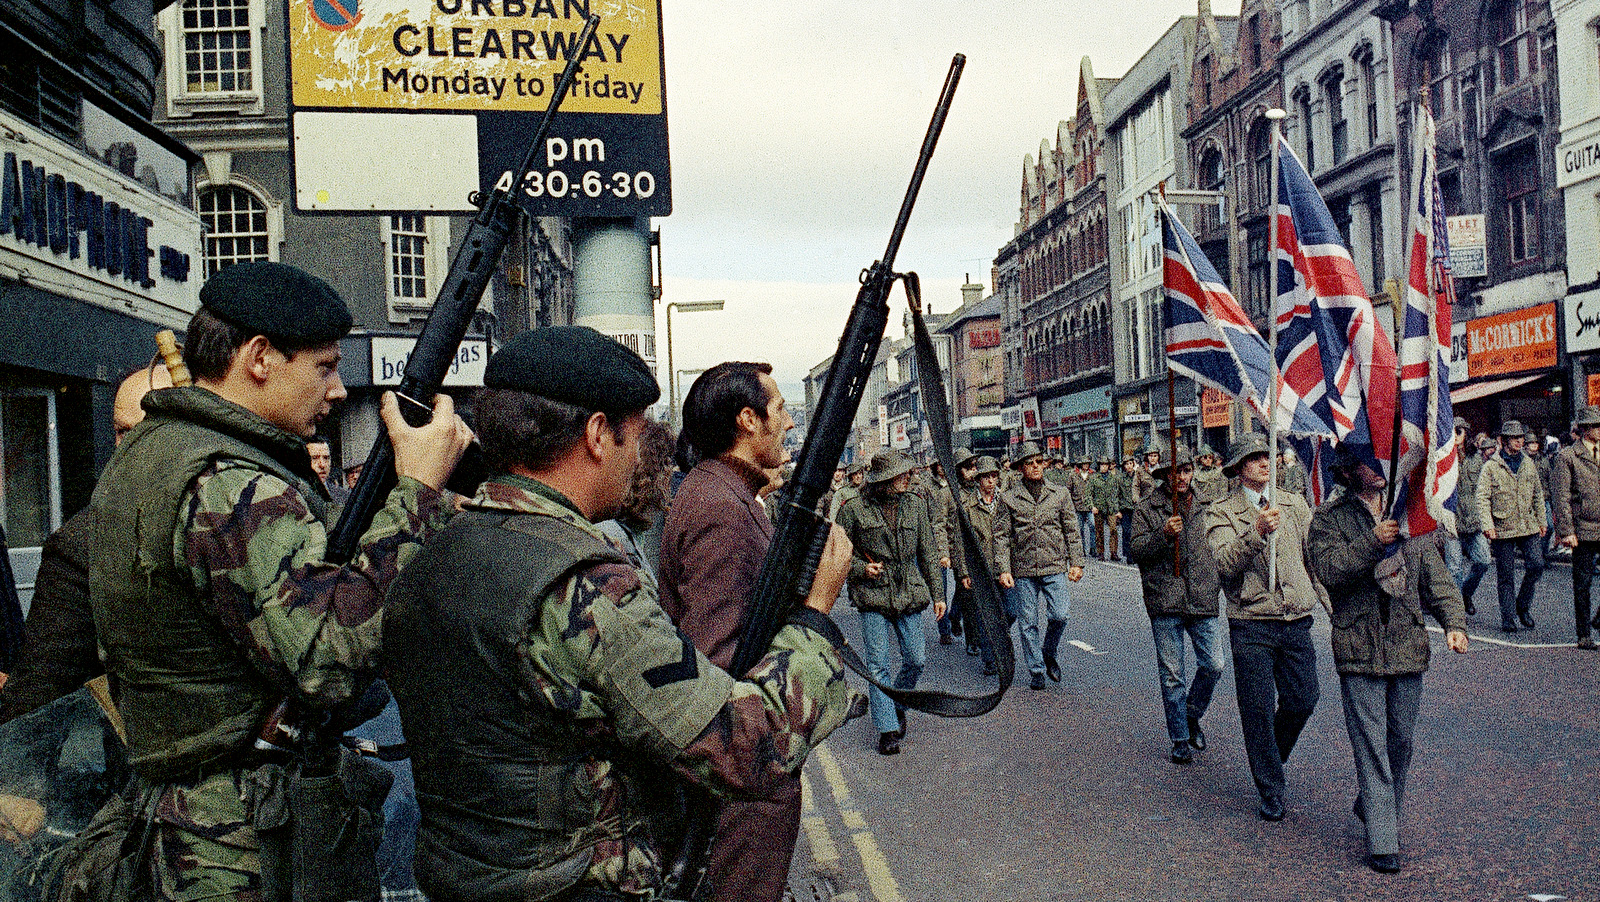 The Pro-British Ulster Defence Association parade through Belfast, Northern Ireland under the protection of armed British troops, in August 1972. (AP Photo)